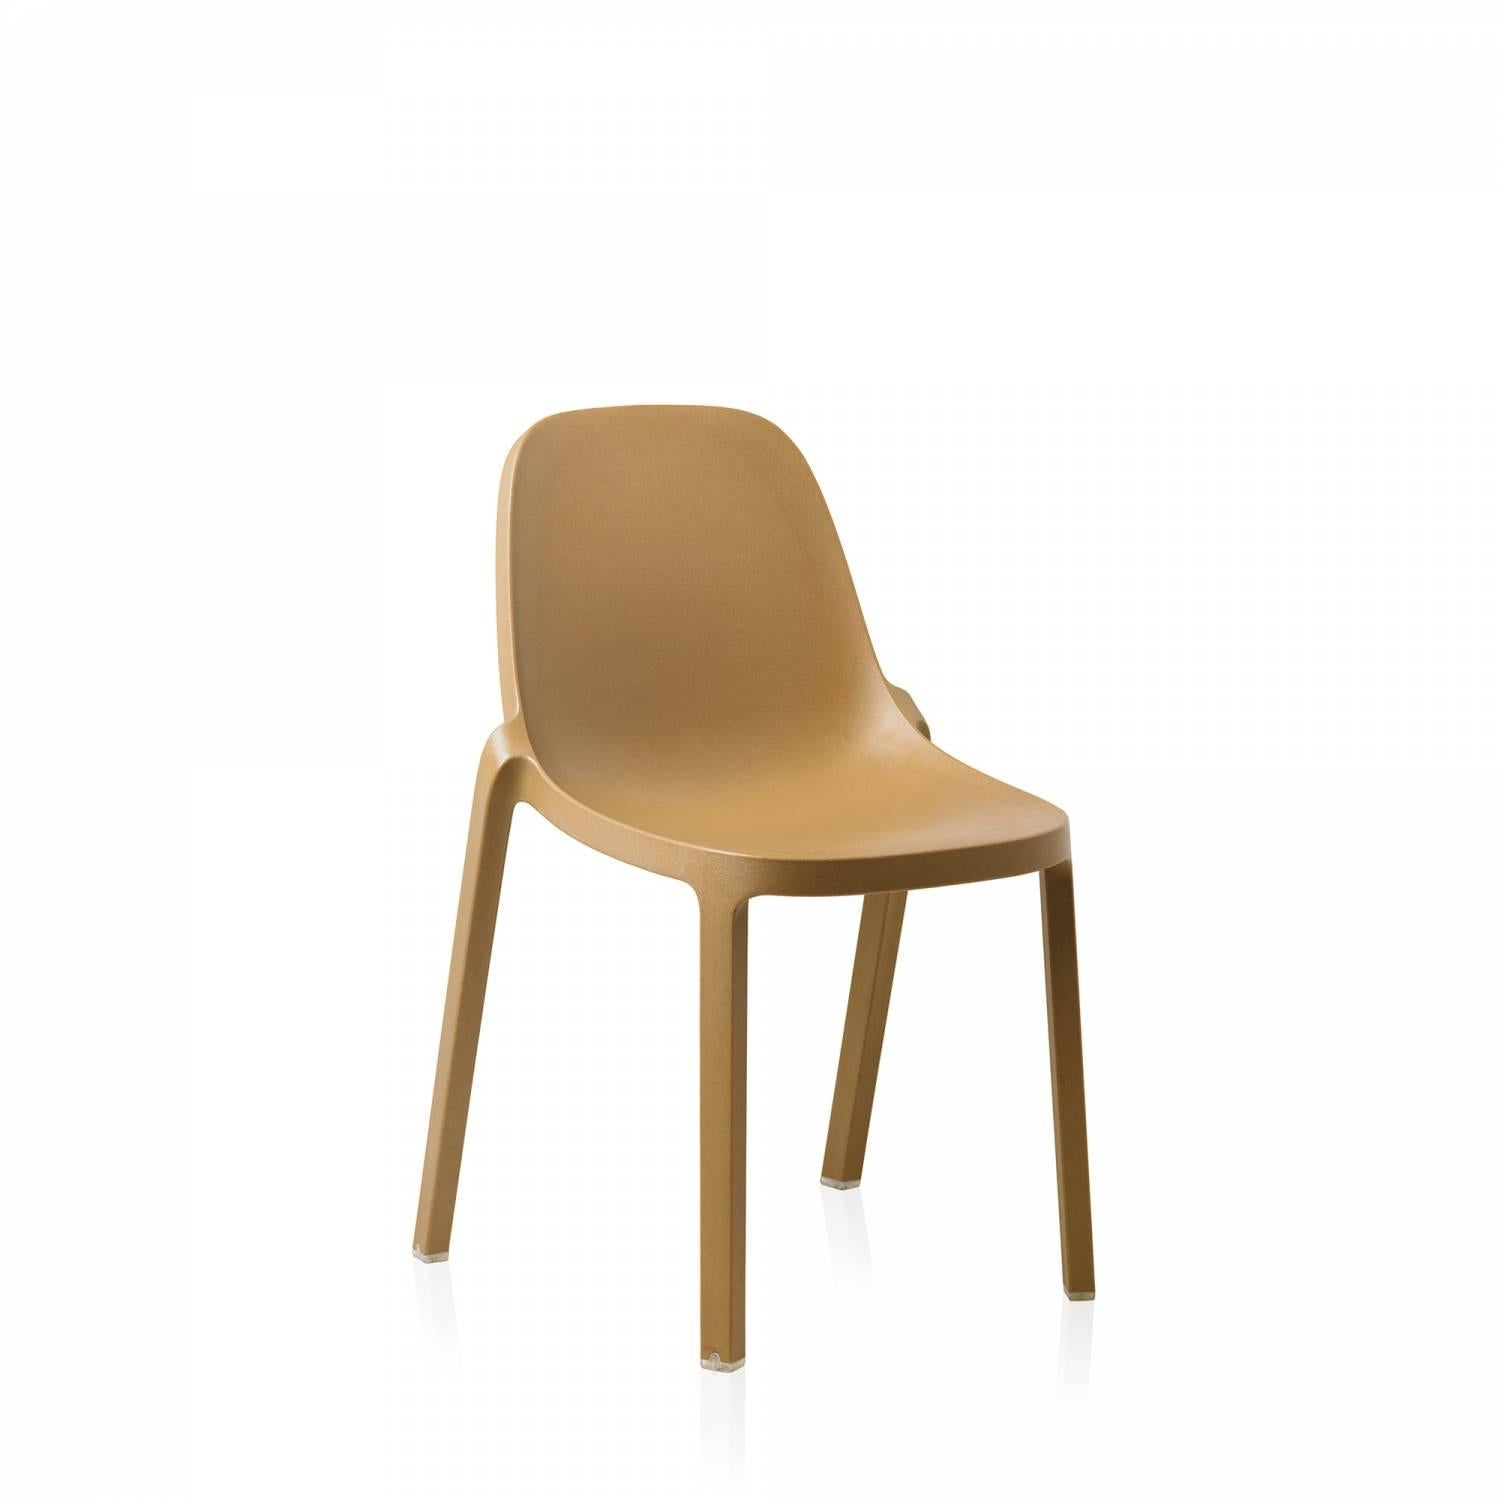 Philippe Starck and Emeco came together to create a new chair that is reclaimed, repurposed, recyclable – and designed to last. The chair is made from 75% waste polypropylene and 15% reclaimed wood fiber that would normally be swept into the trash,